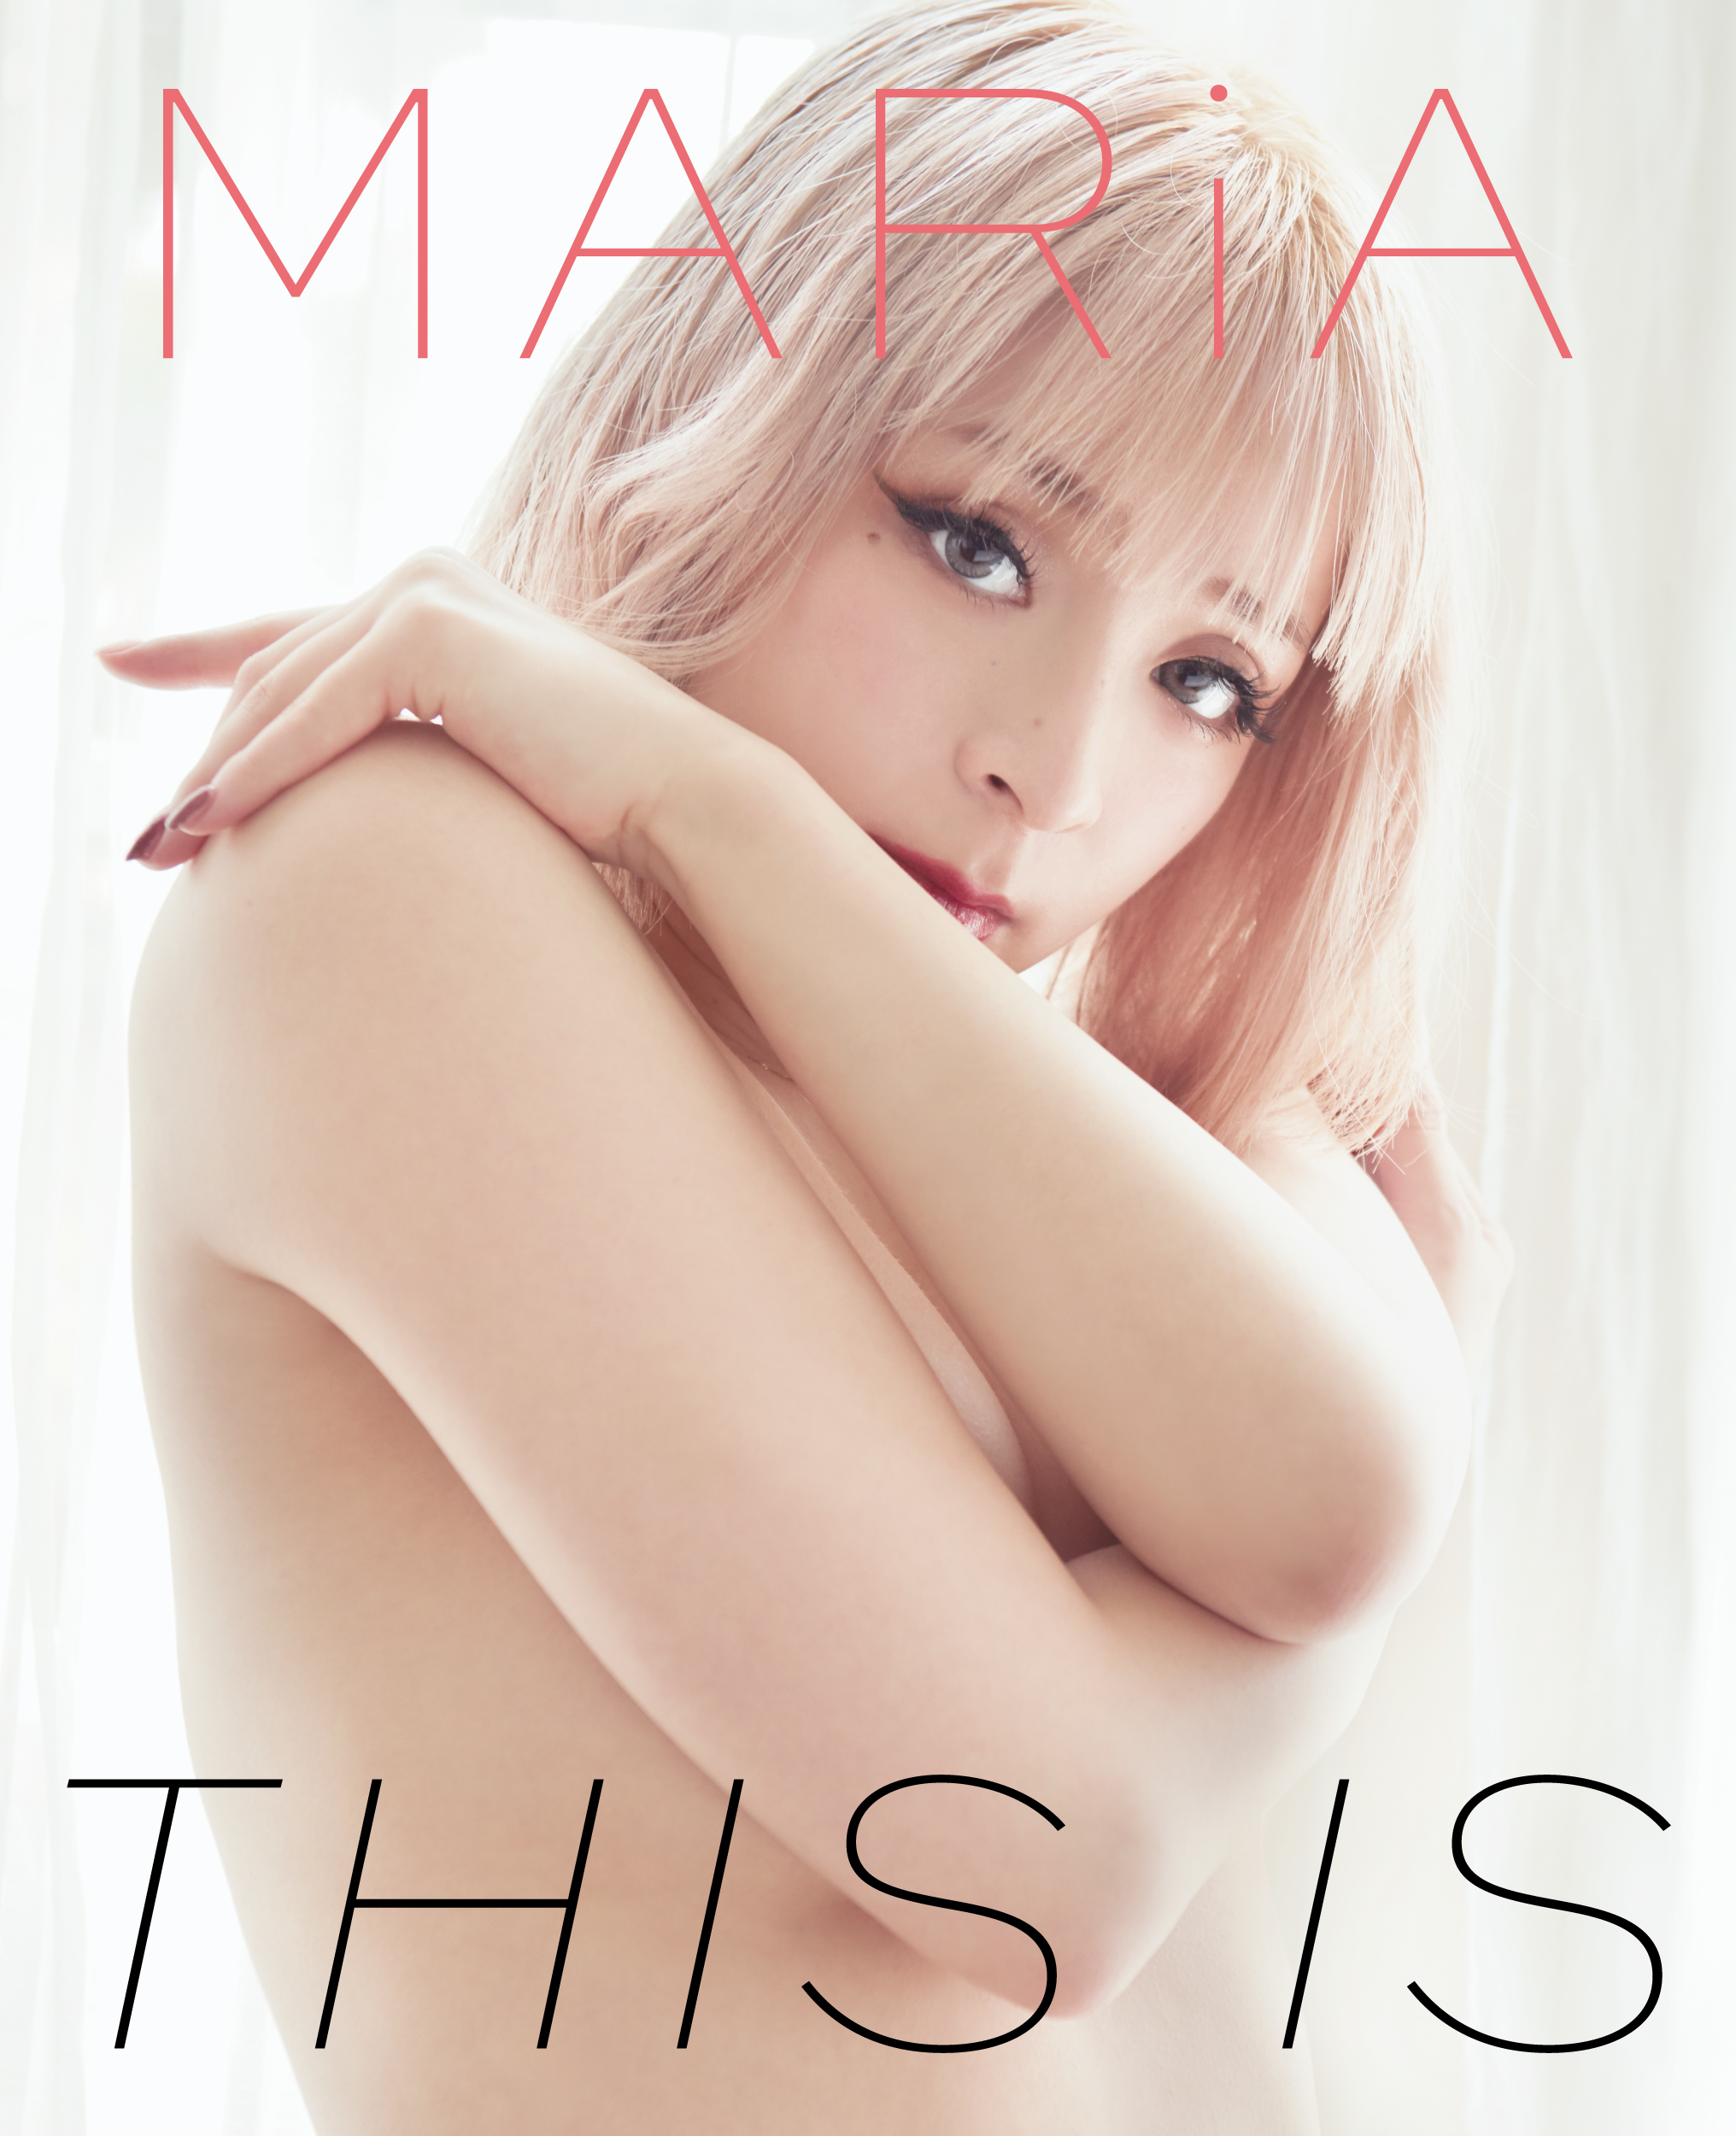 【Ponycanyon Online Limited Version】 MARiA Photobook+Blu-ray “THIS IS” Release on Aug 6th,2021